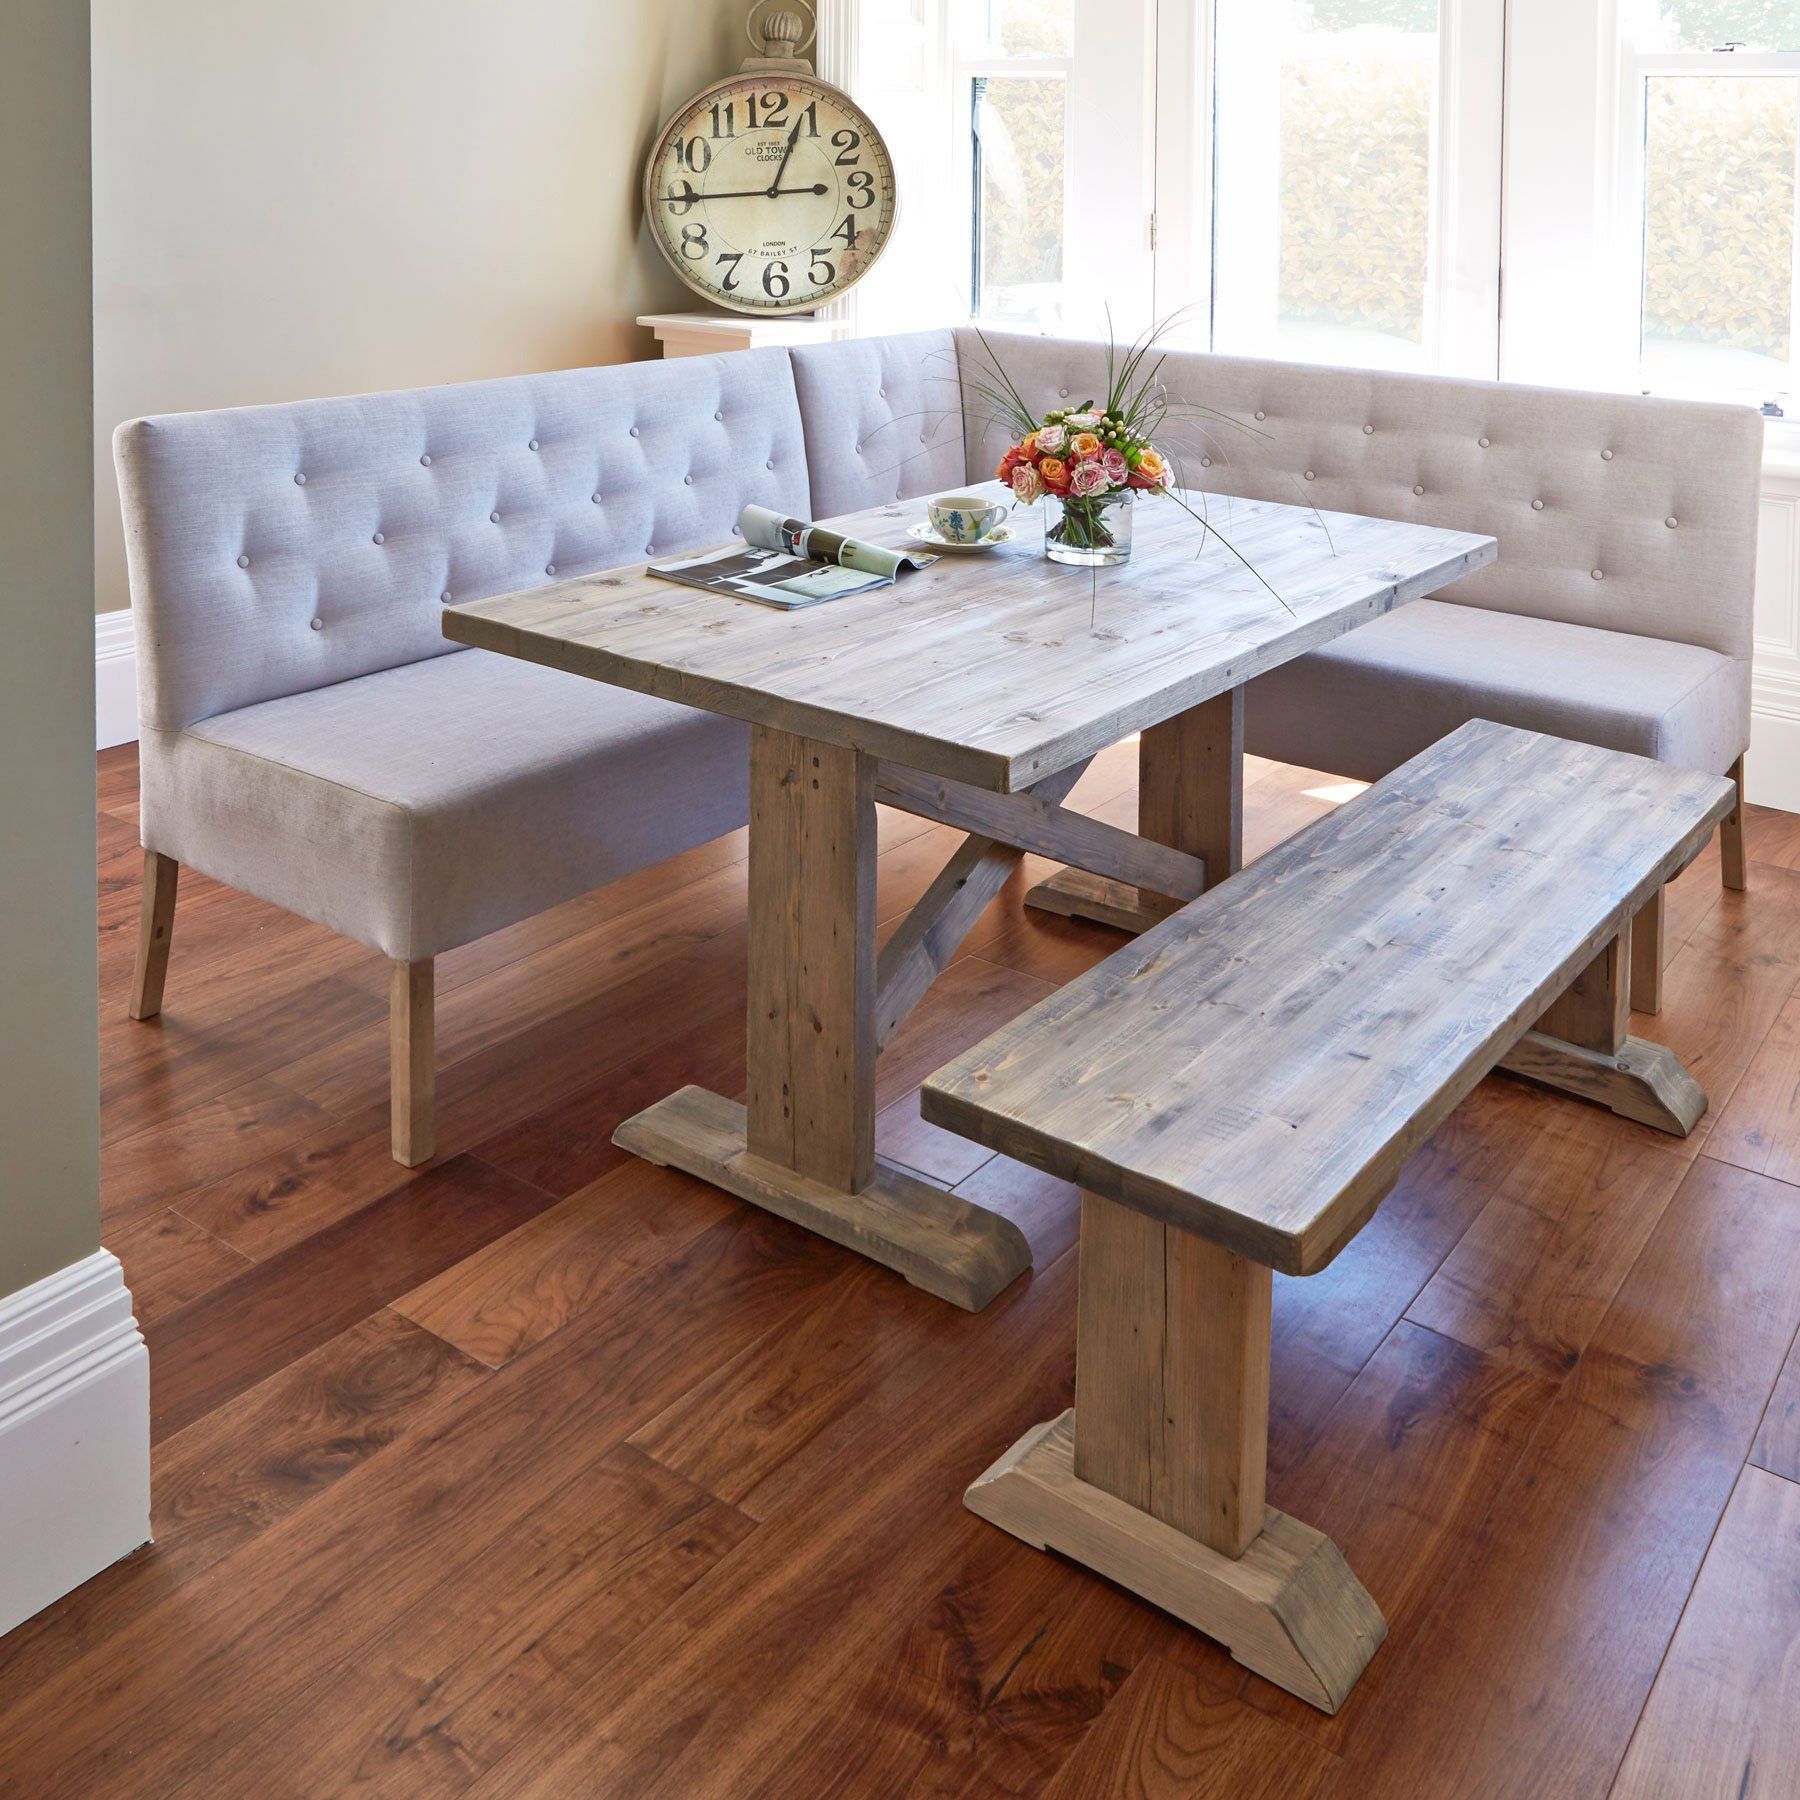 Maximize Your Space with a Corner Dining Room Table and Bench